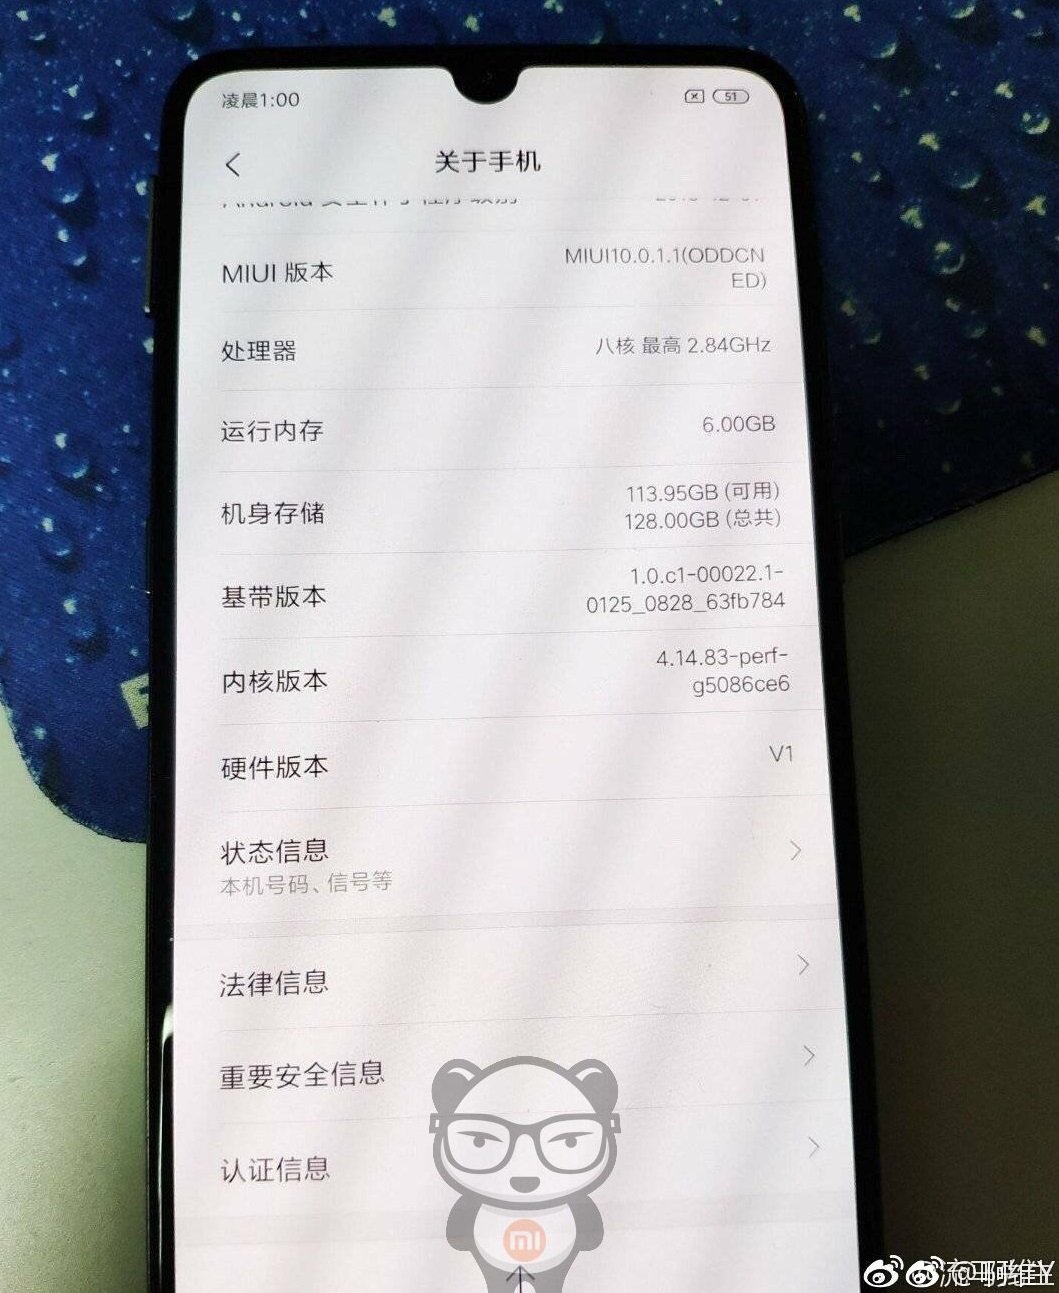 Mi 9 live image about phone